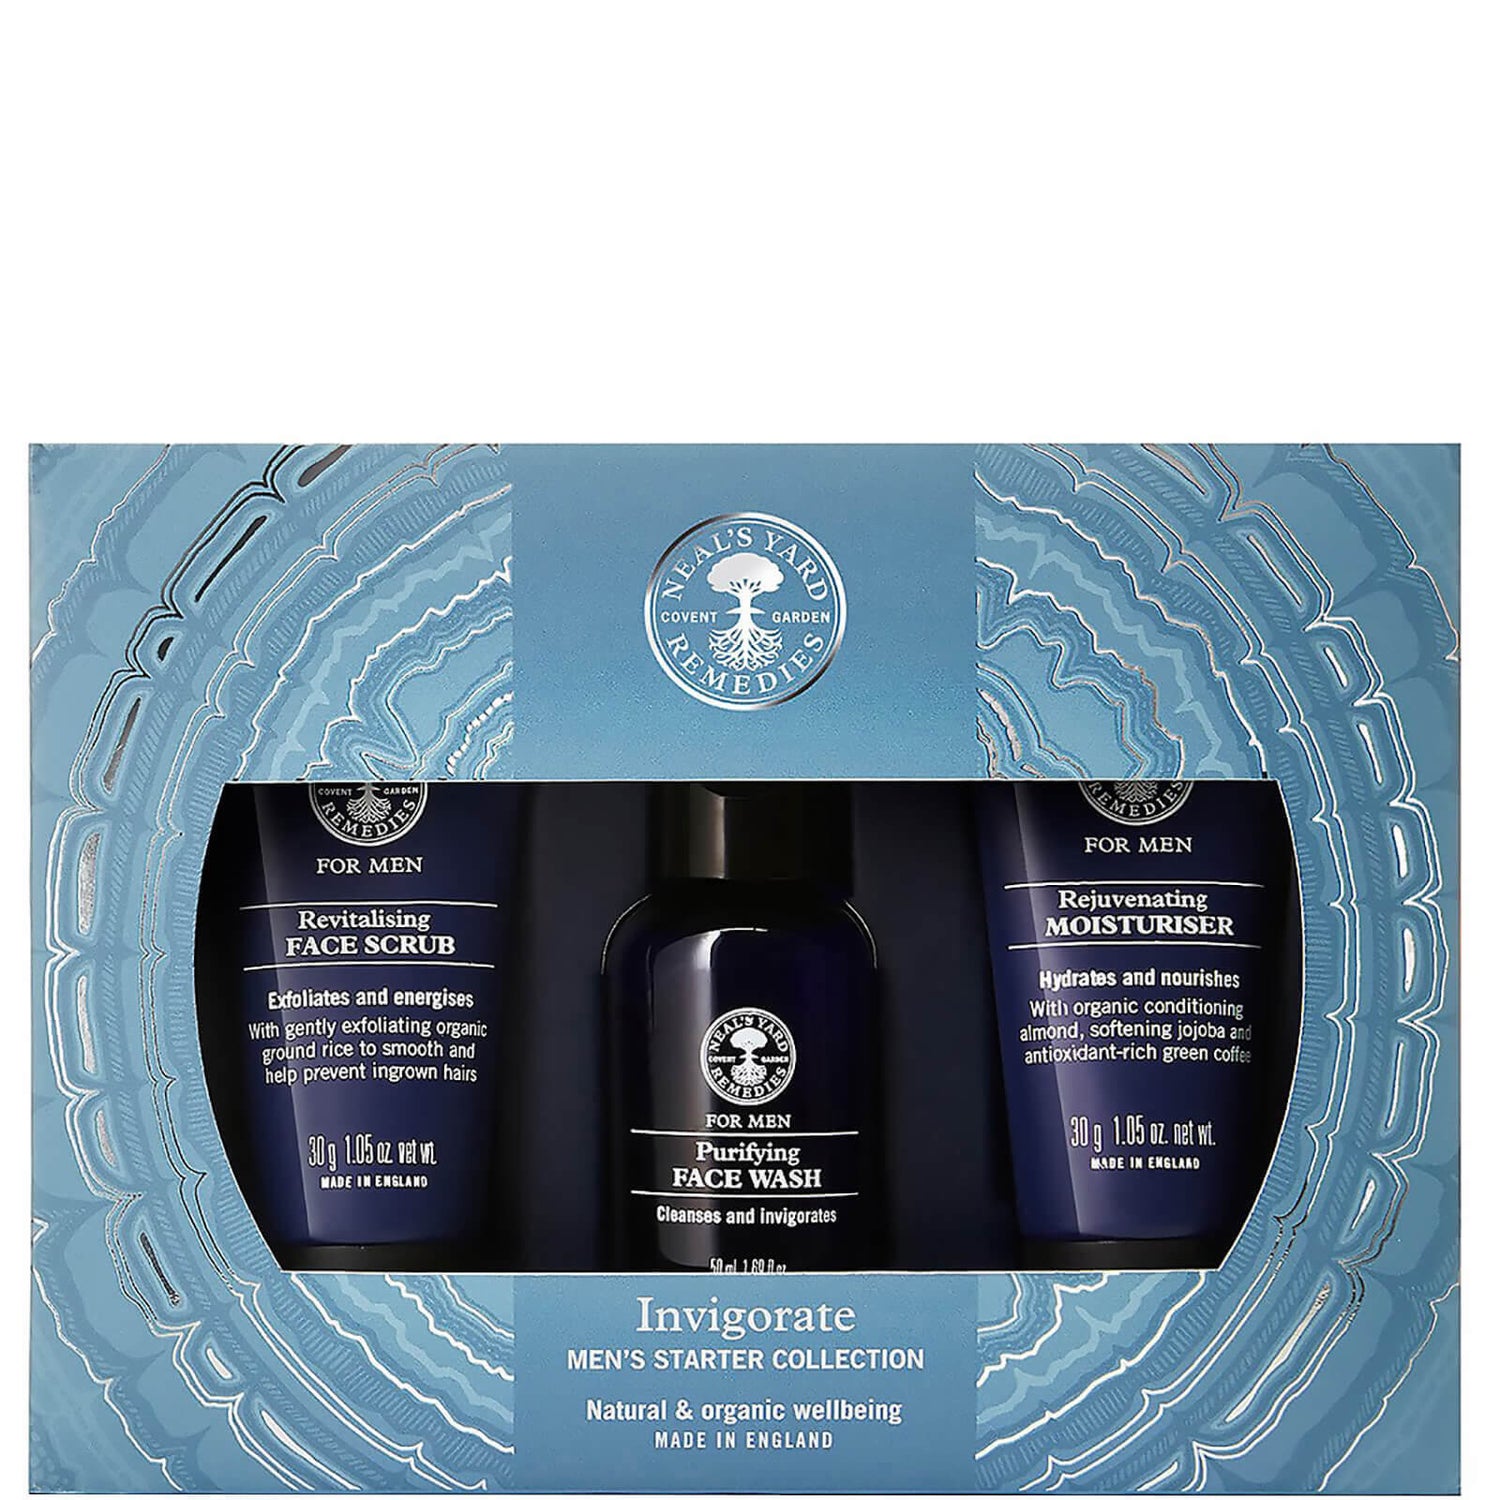 Neal's Yard Remedies Invigorate Men's Starter Collection